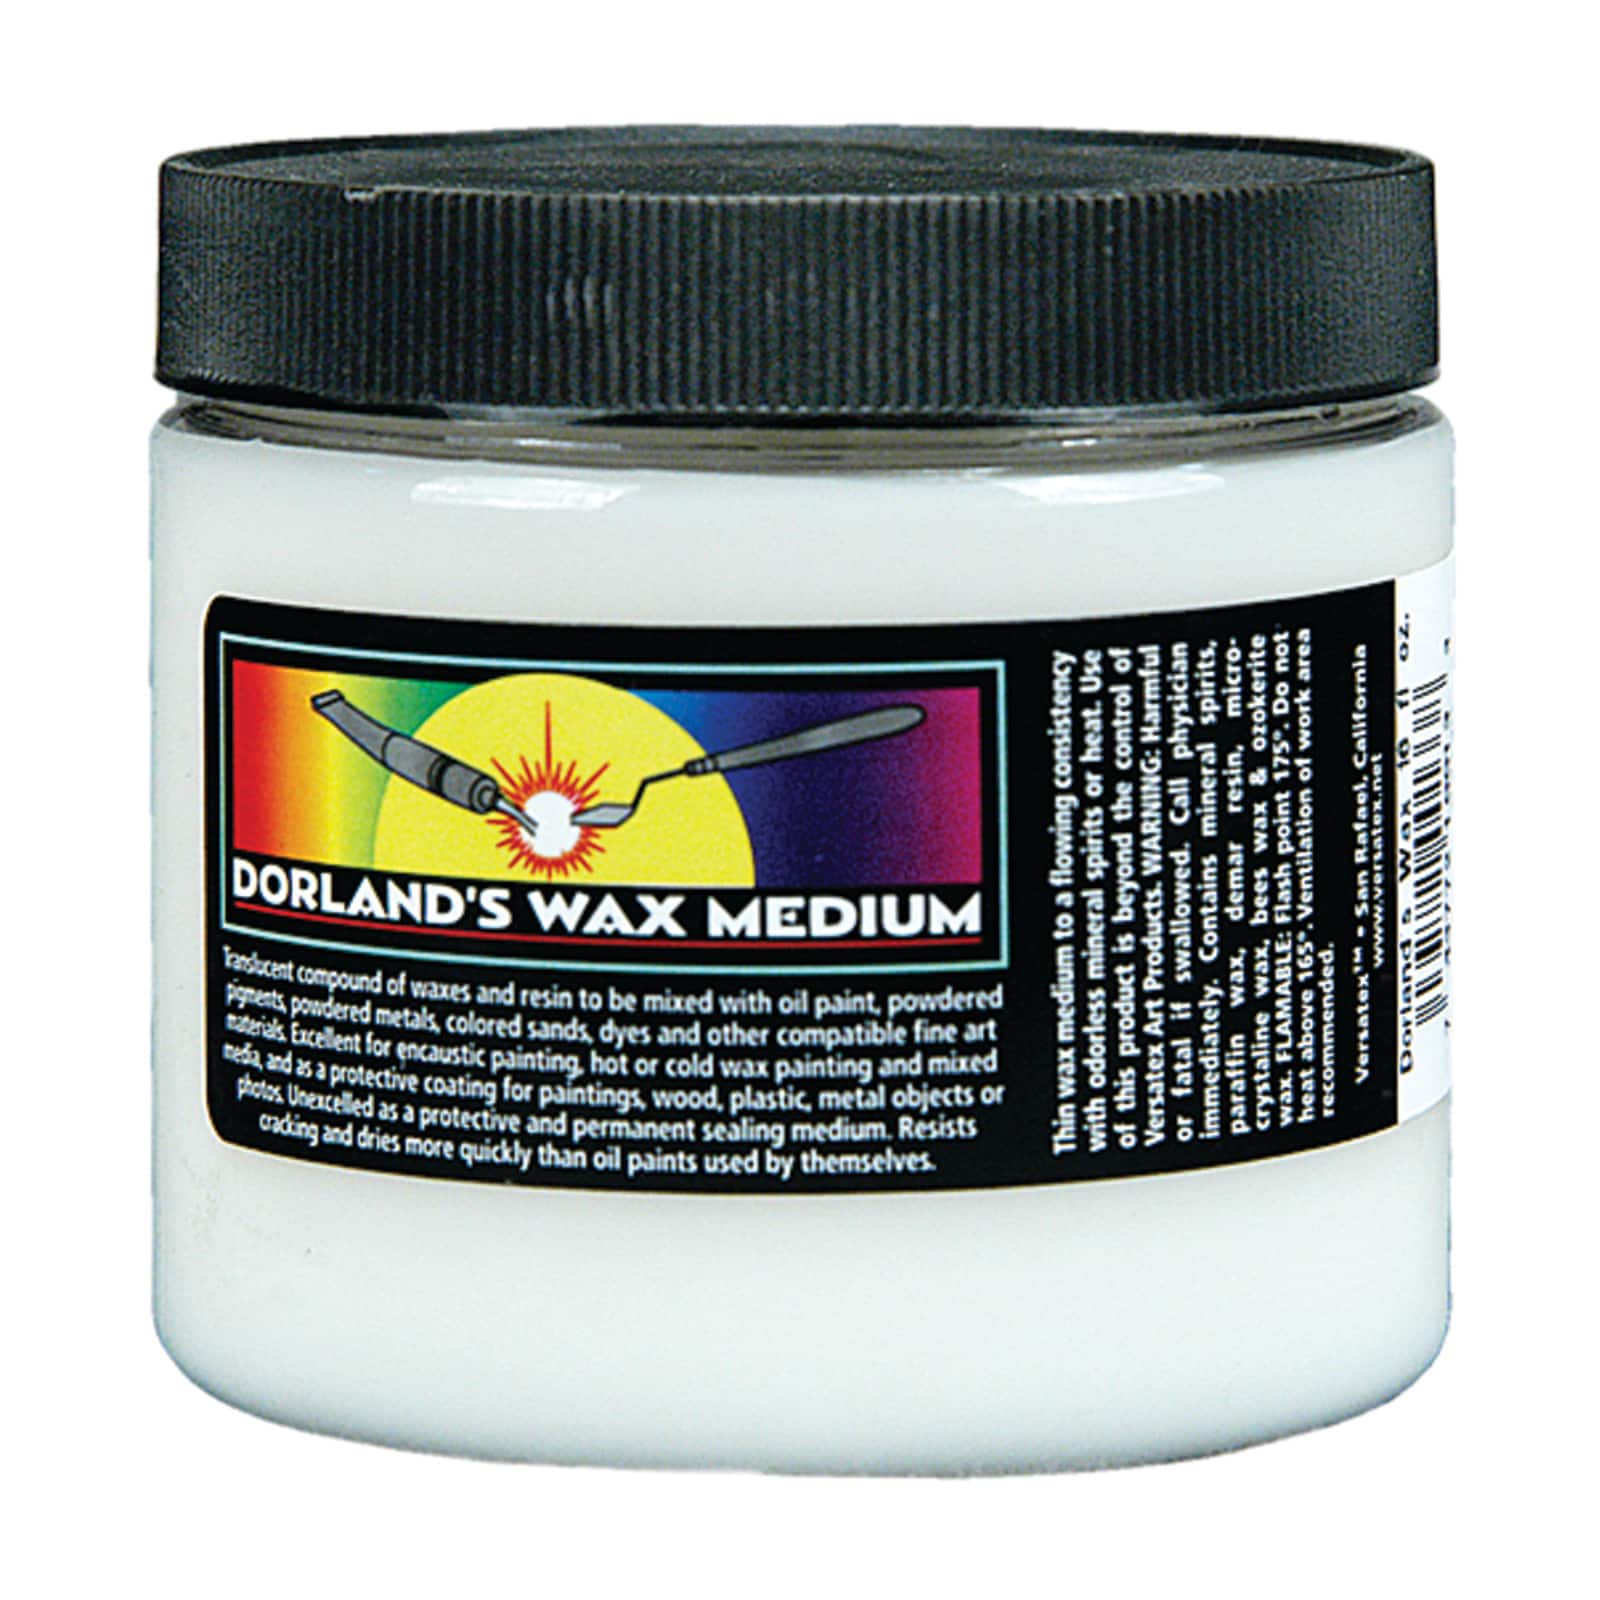 Jacquard Dorlands Wax - 4 Ounce - Versatile Pure Wax and Damar Resin -  Protective Topcoat for Sealing and Finishing